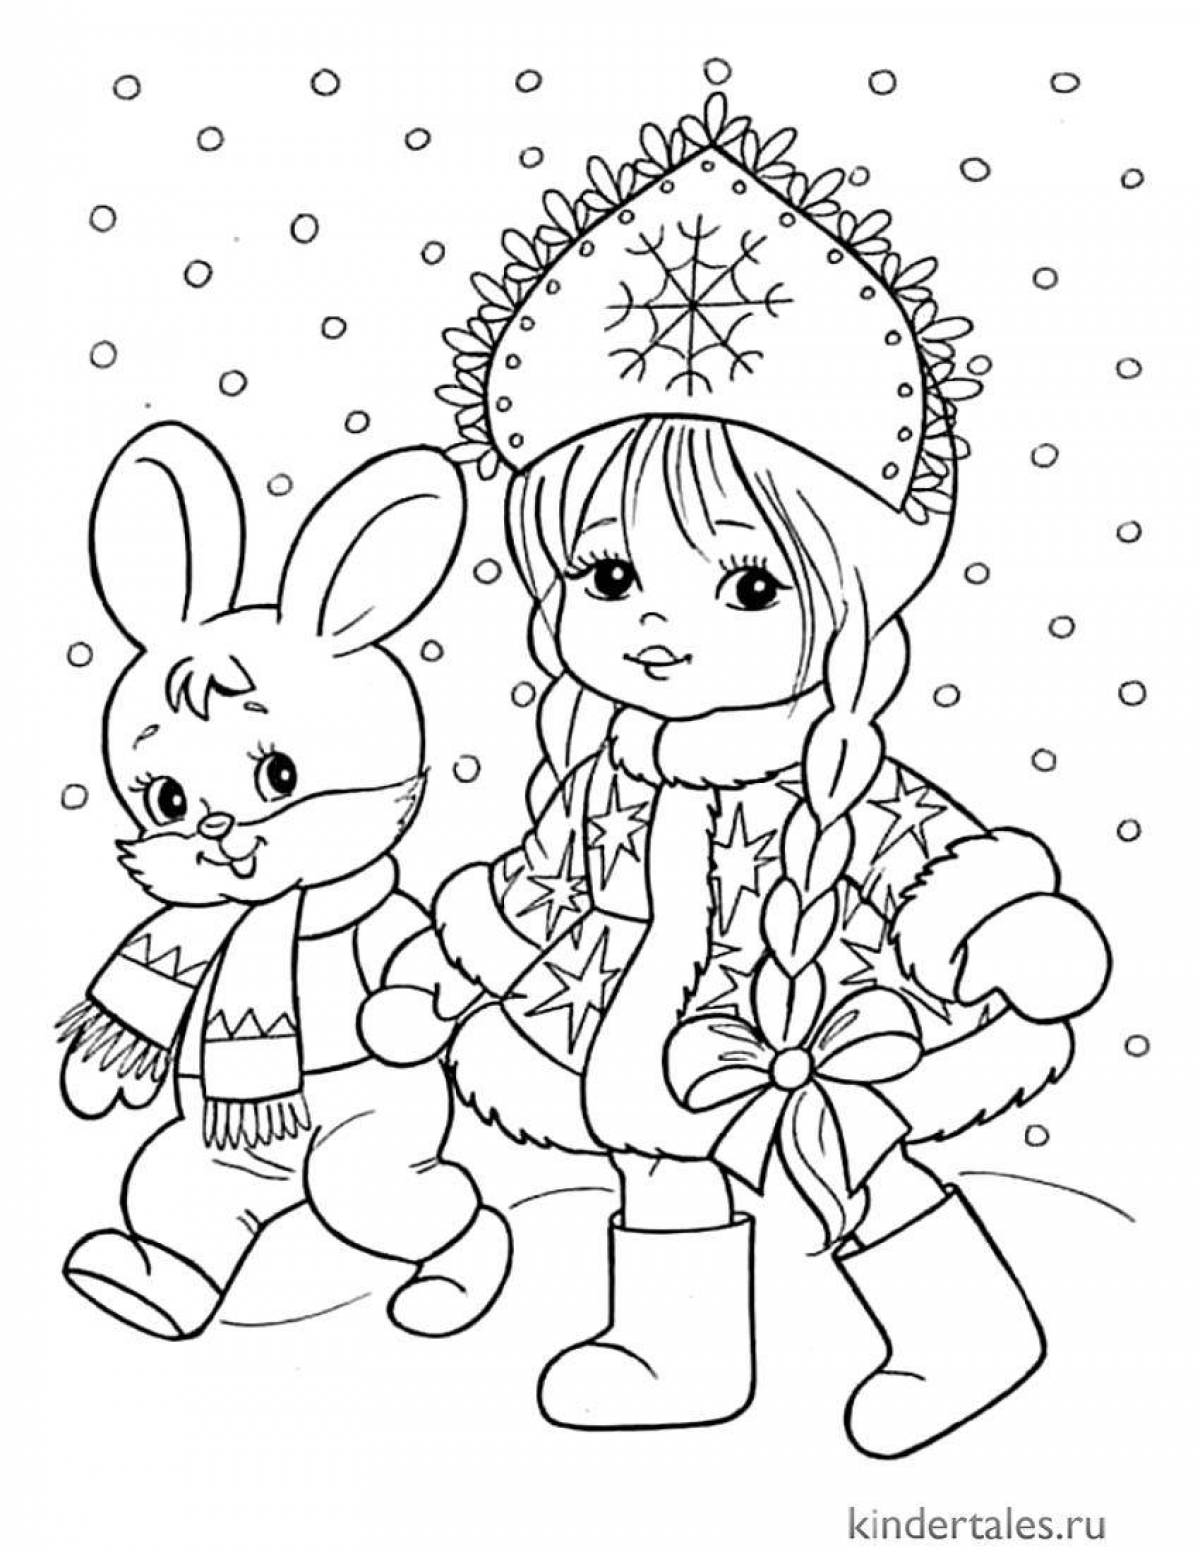 Crazy Christmas coloring book for 12 year old girls